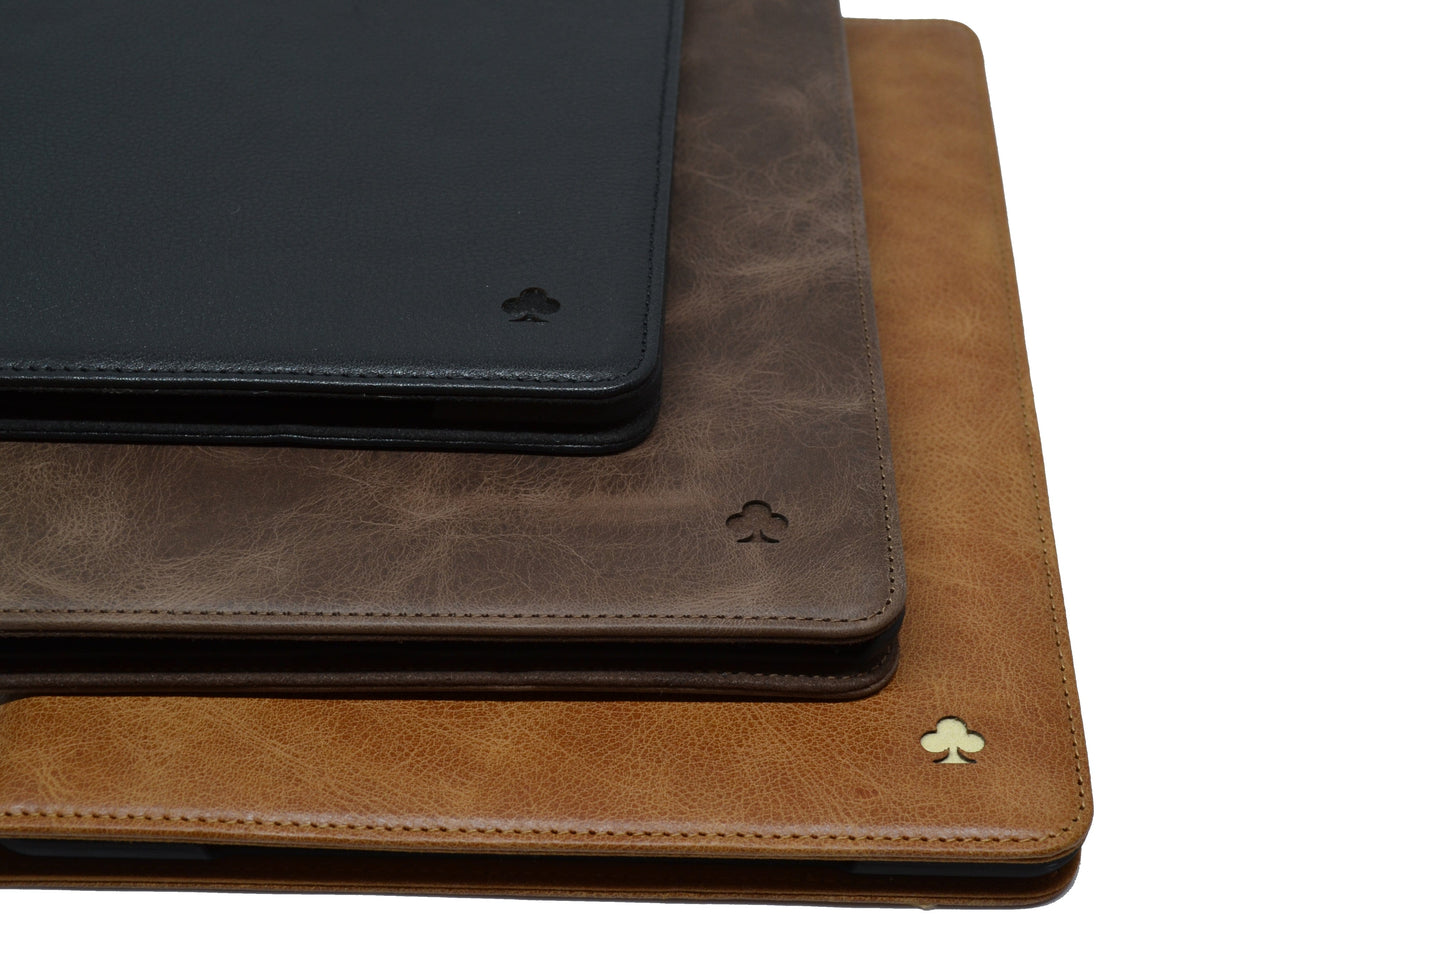 iPad Pro 12.9" 3rd/4th/5th/6th Generation 2018-2022 Release Leather Case. Premium Genuine Leather Stand/Cover/Flip Case (Black)